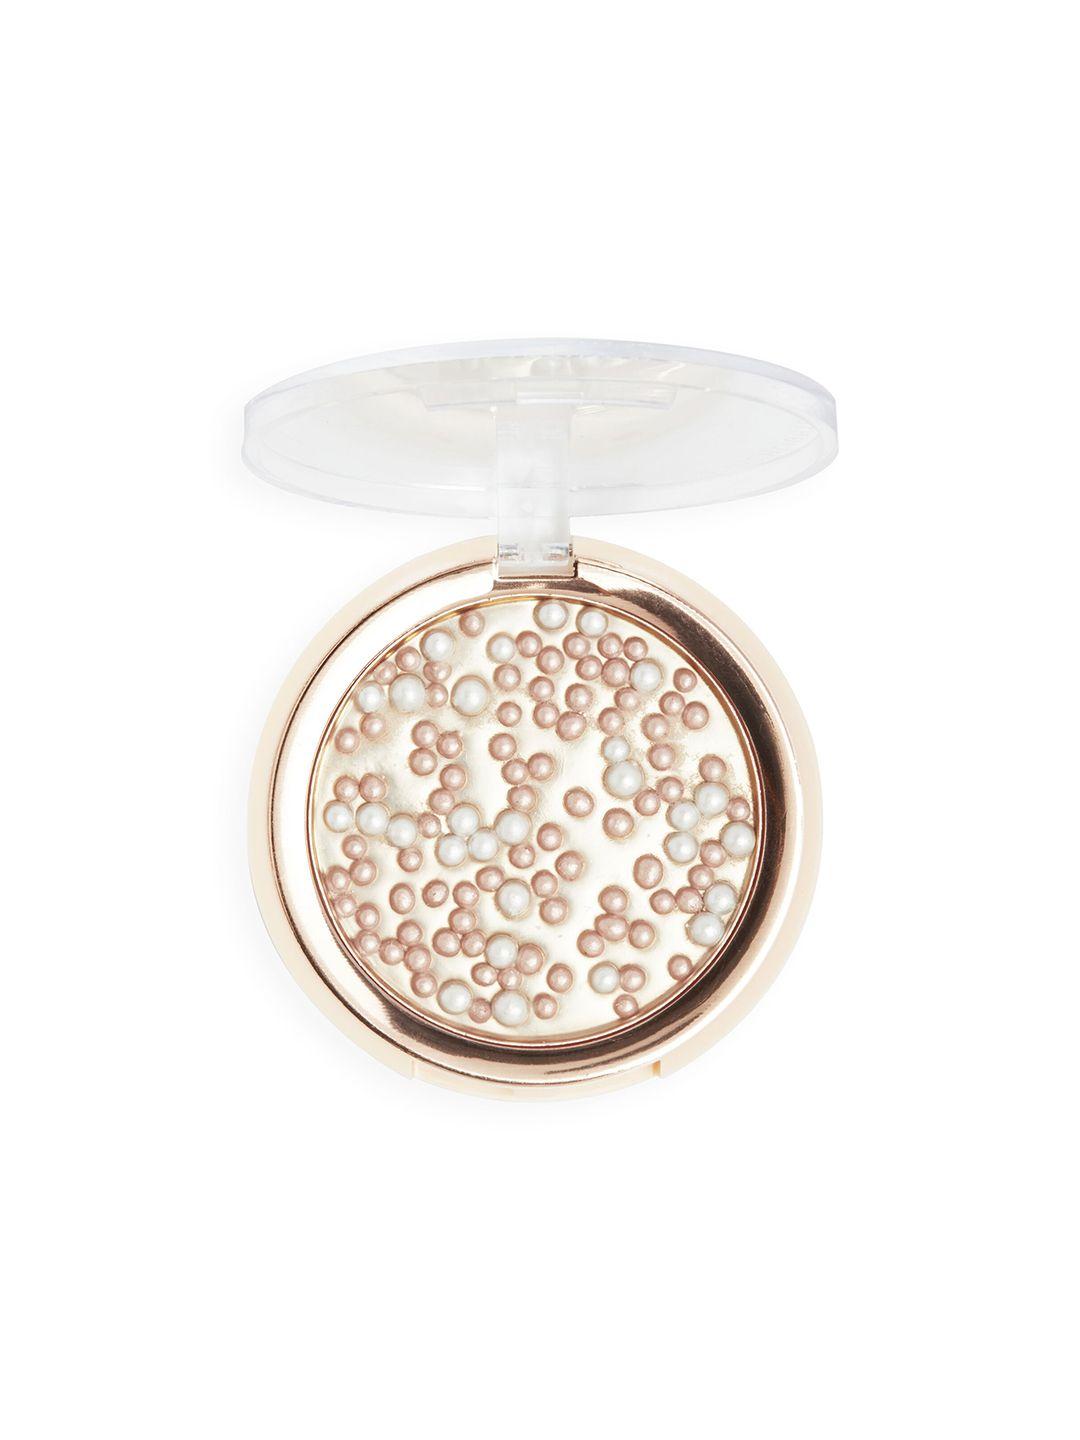 makeup revolution london highly buildable bubble balm highlighter 7.5 g - icy rose